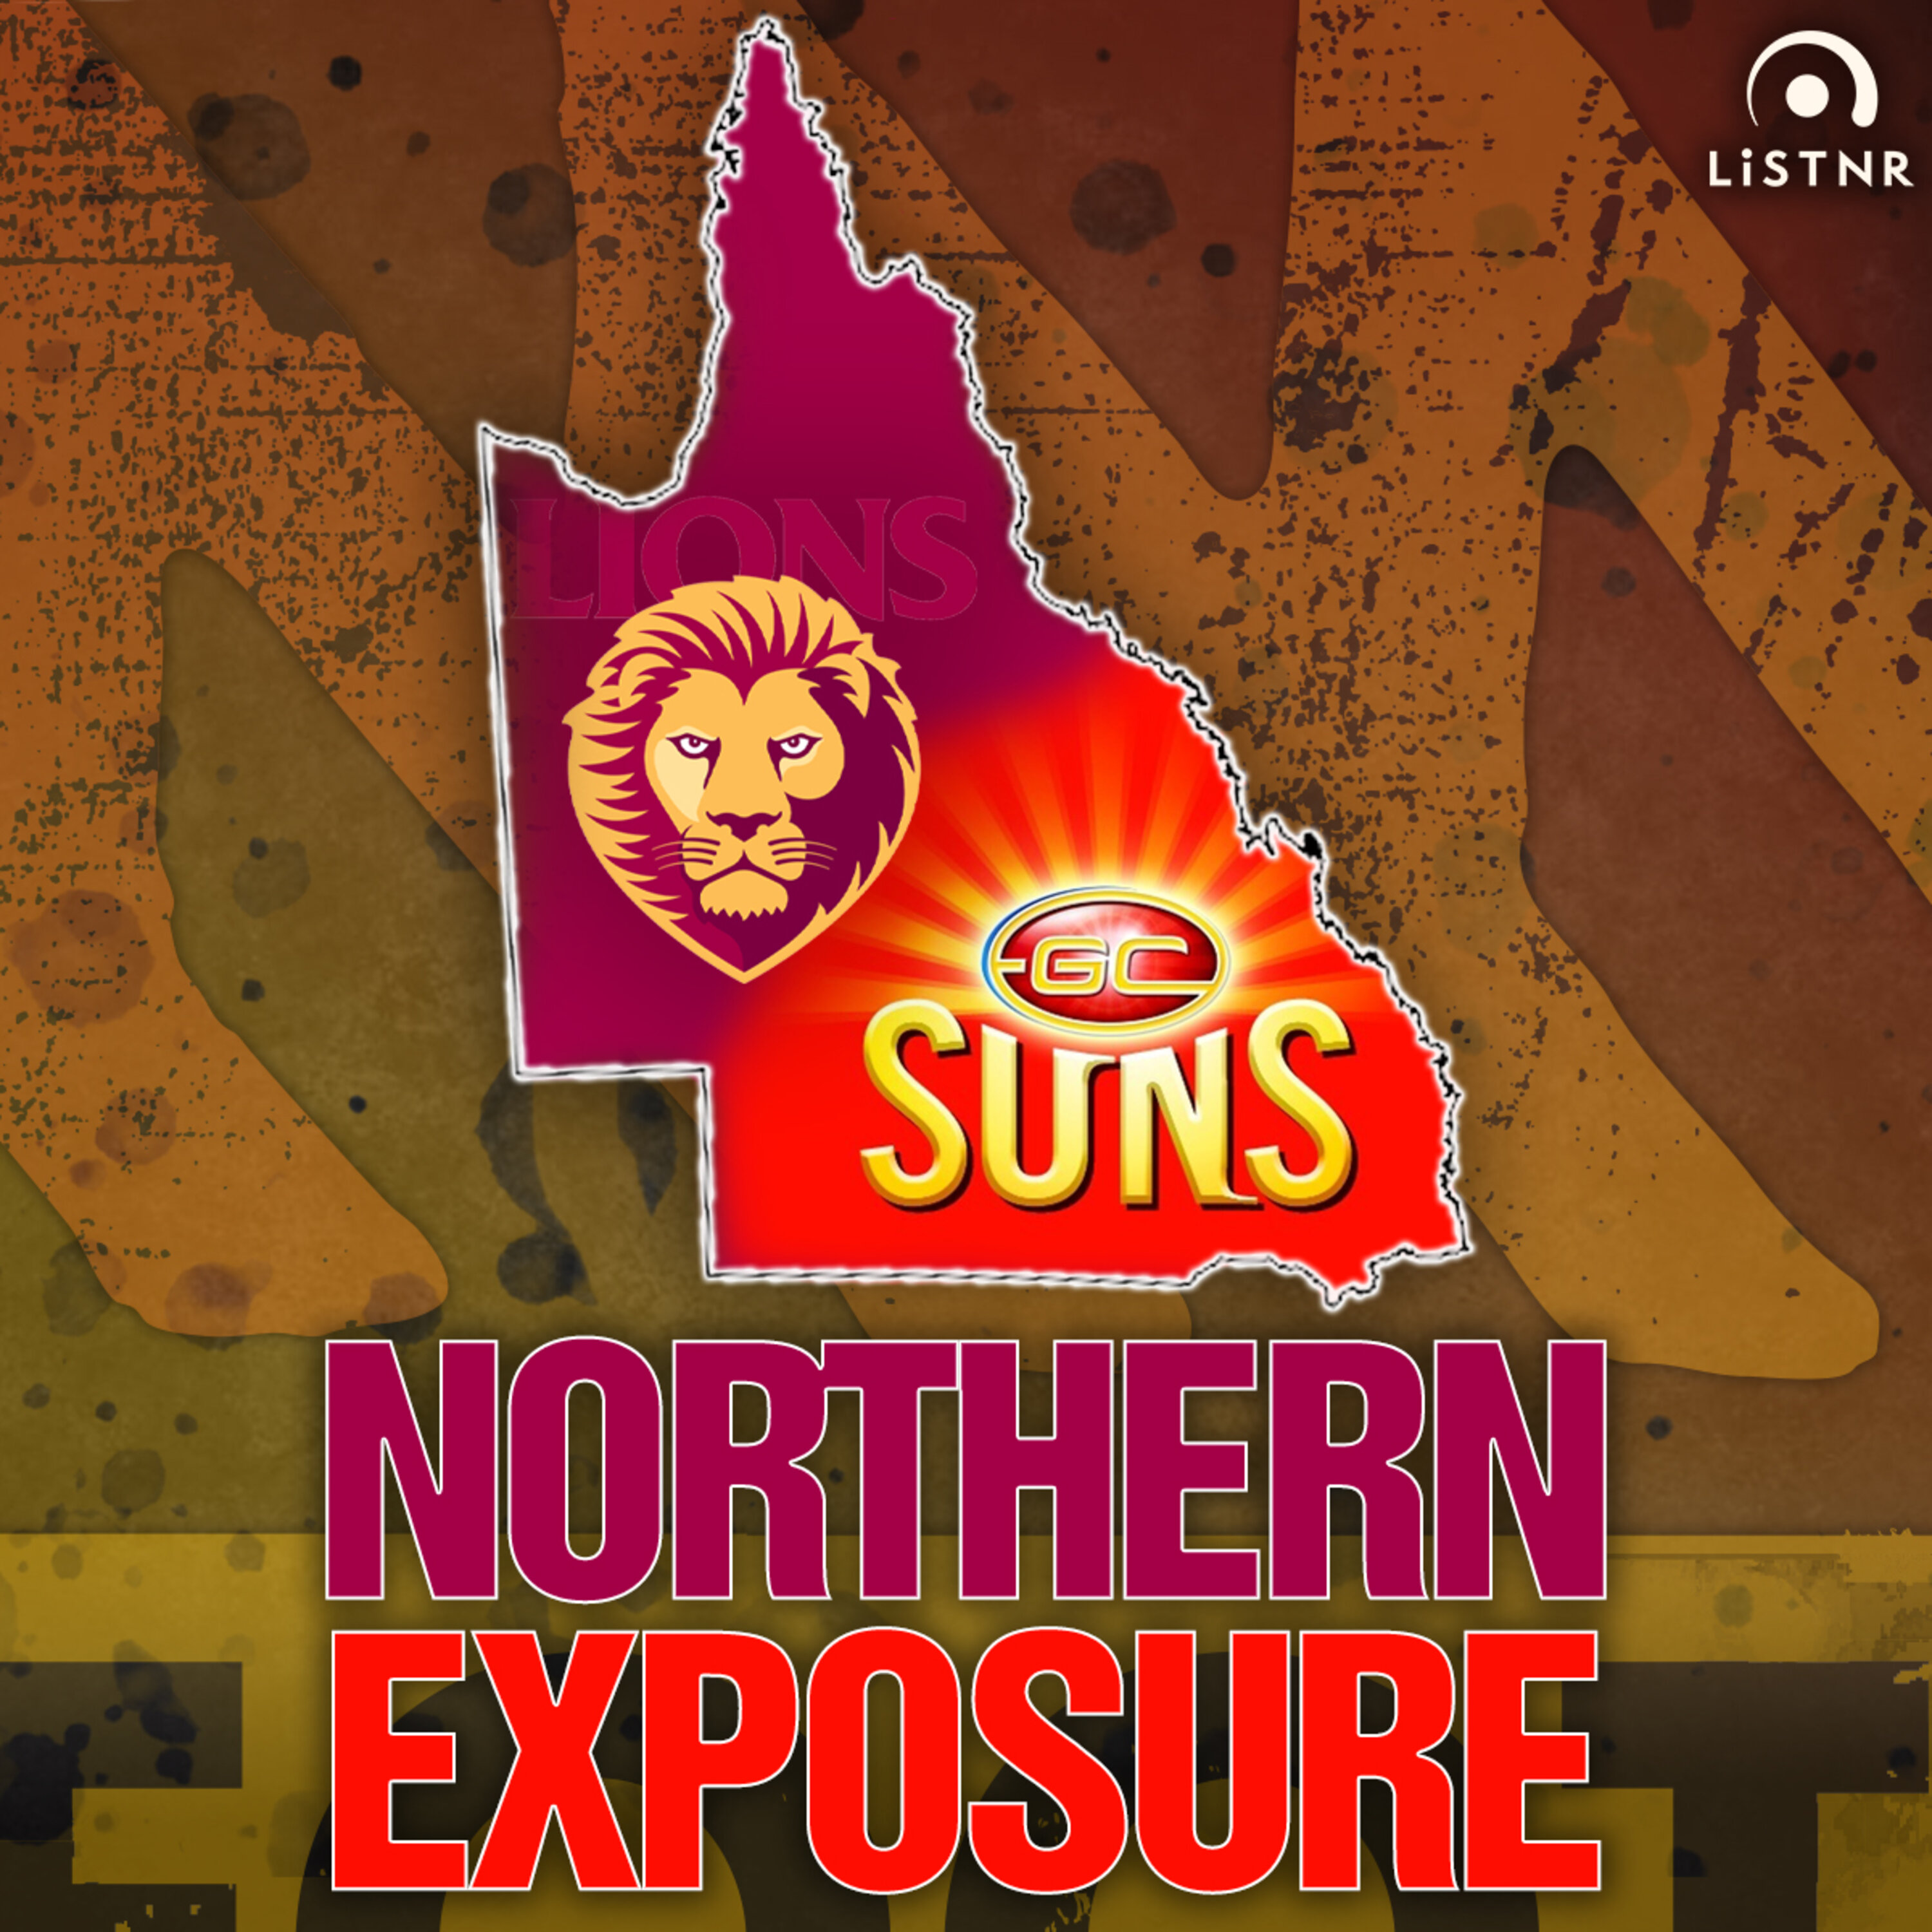 Northern Exposure | Tough Friday night for the Lions, what the Suns need to compete moving forward, does Dayne Zorko stay Brisbane captain in 2023?